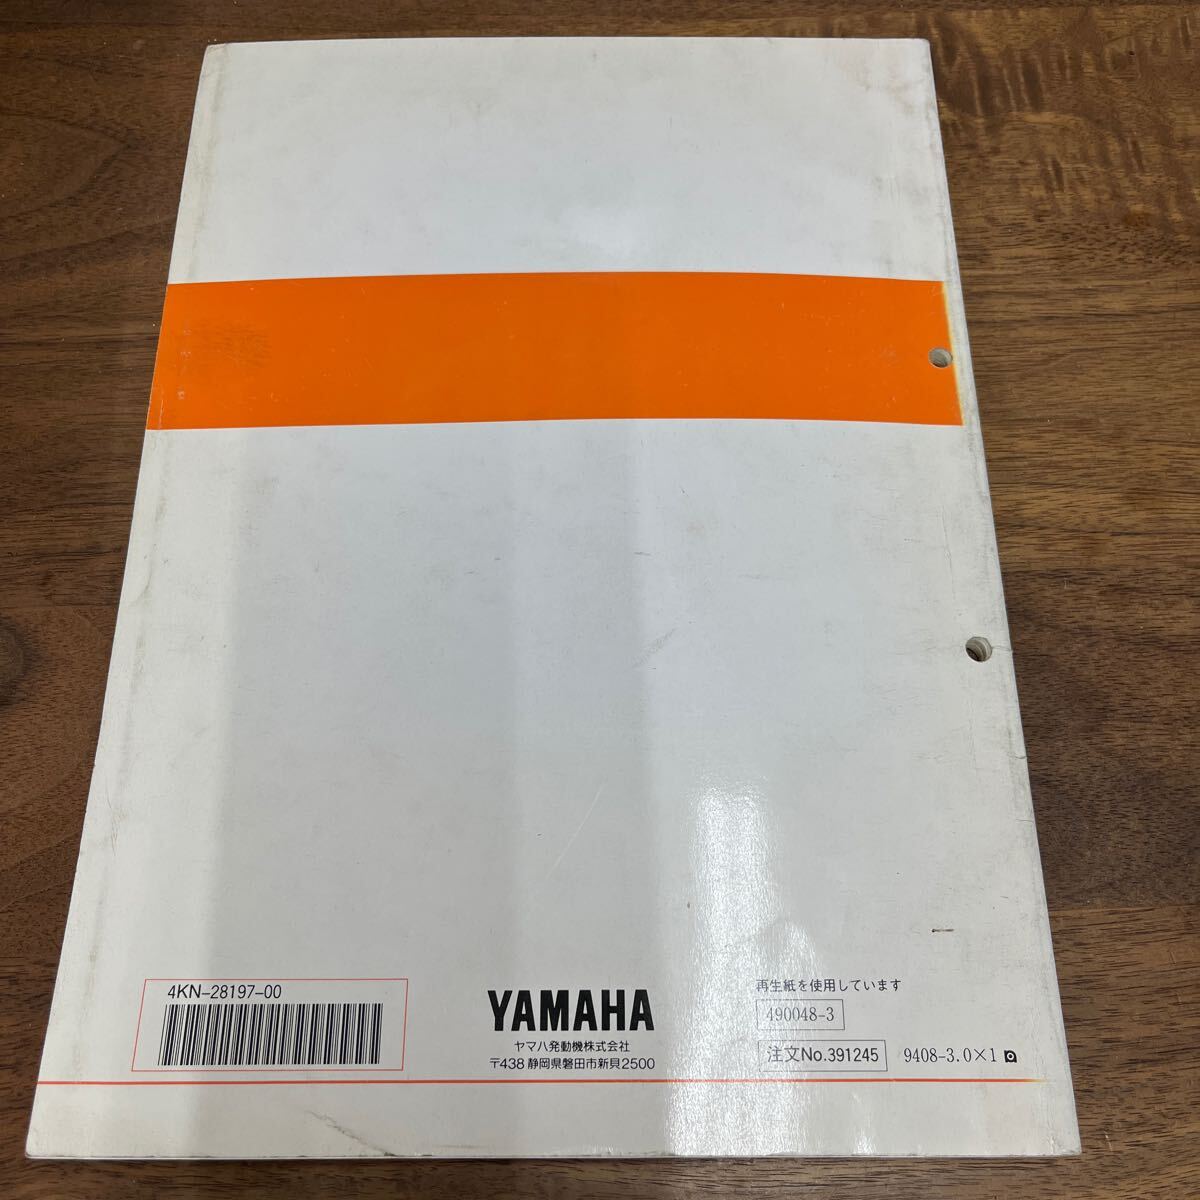 MB-2962* click post ( nationwide equal postage 185 jpy ) YAMAHA BUSINESS Yamaha service manual BA50/S/ST GEAR 4KN-28197-00 1994 year 8 month N-4/②